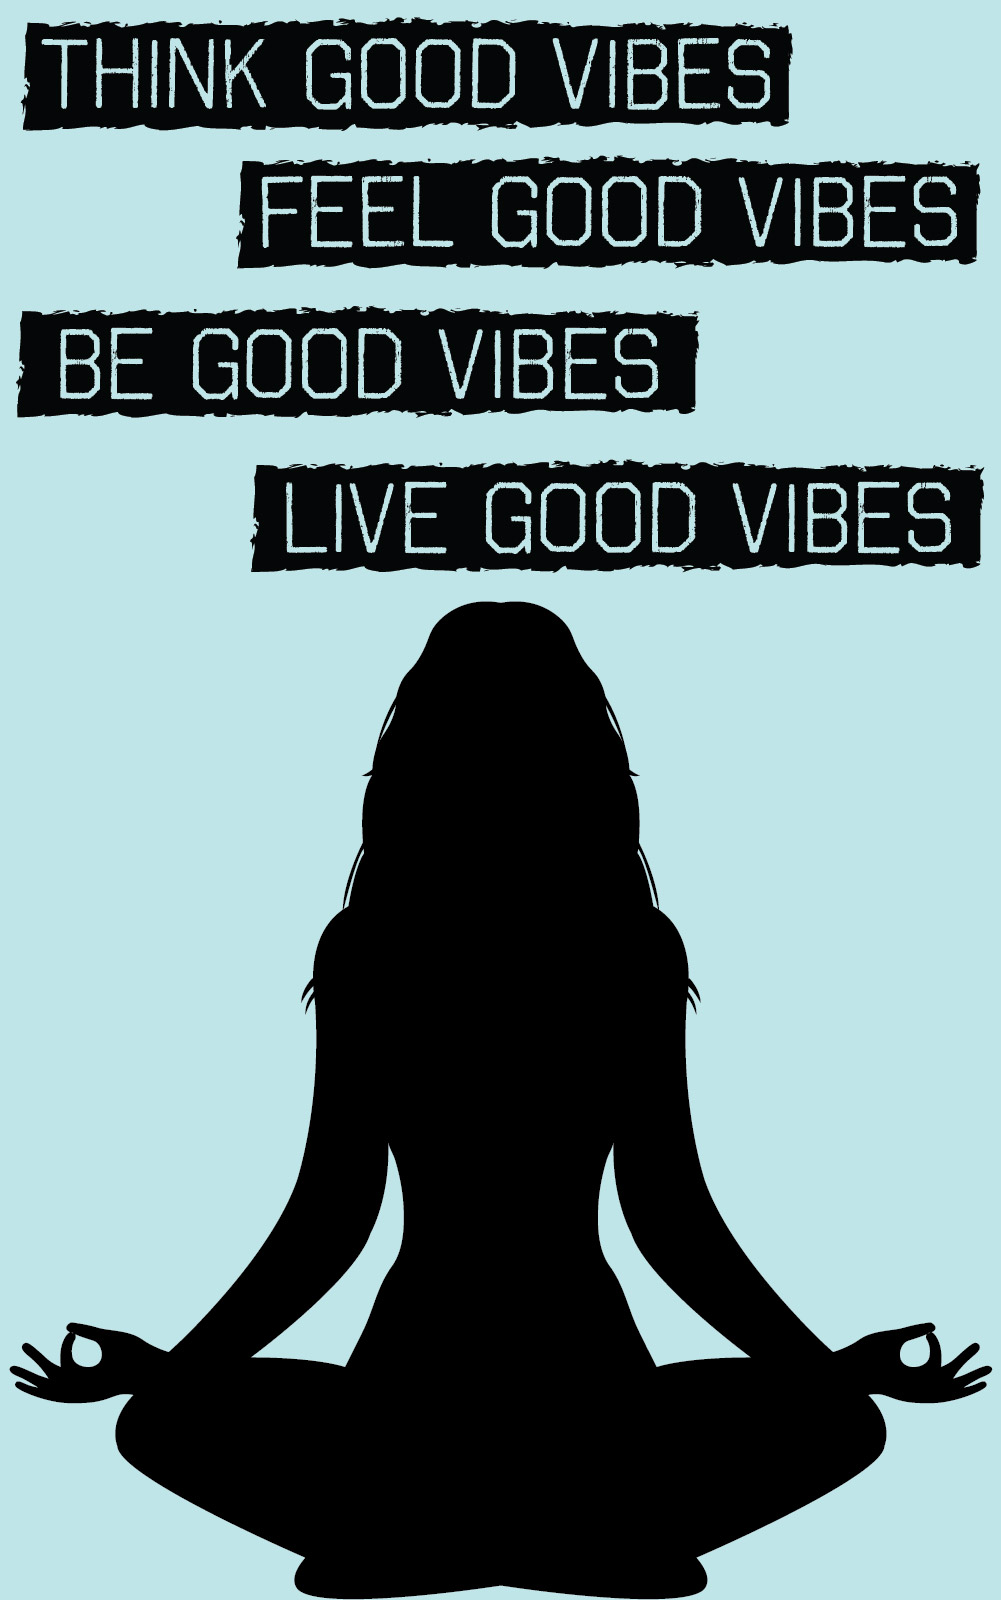 BE GOOD VIBES